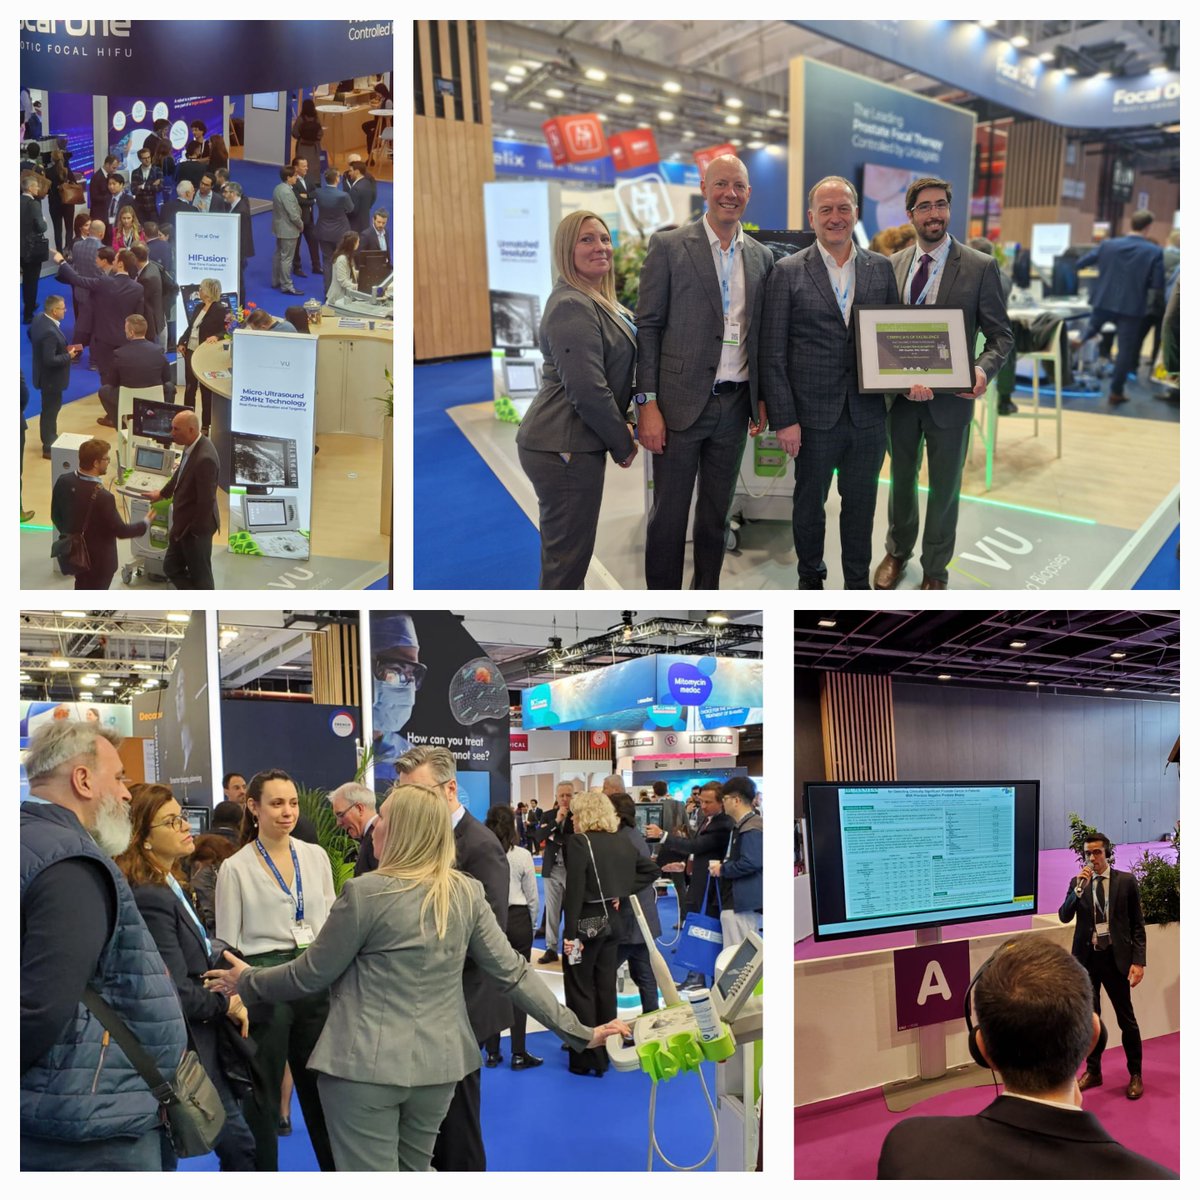 The @ExactImaging team had a great first day at #EAU24 #Paris catching up with our great clients and introducing new customers to the #ExactVu Come and visit us at Booth F36, look forward to seeing you! #SeeCharacterizeTarget #Prostatebiopsy